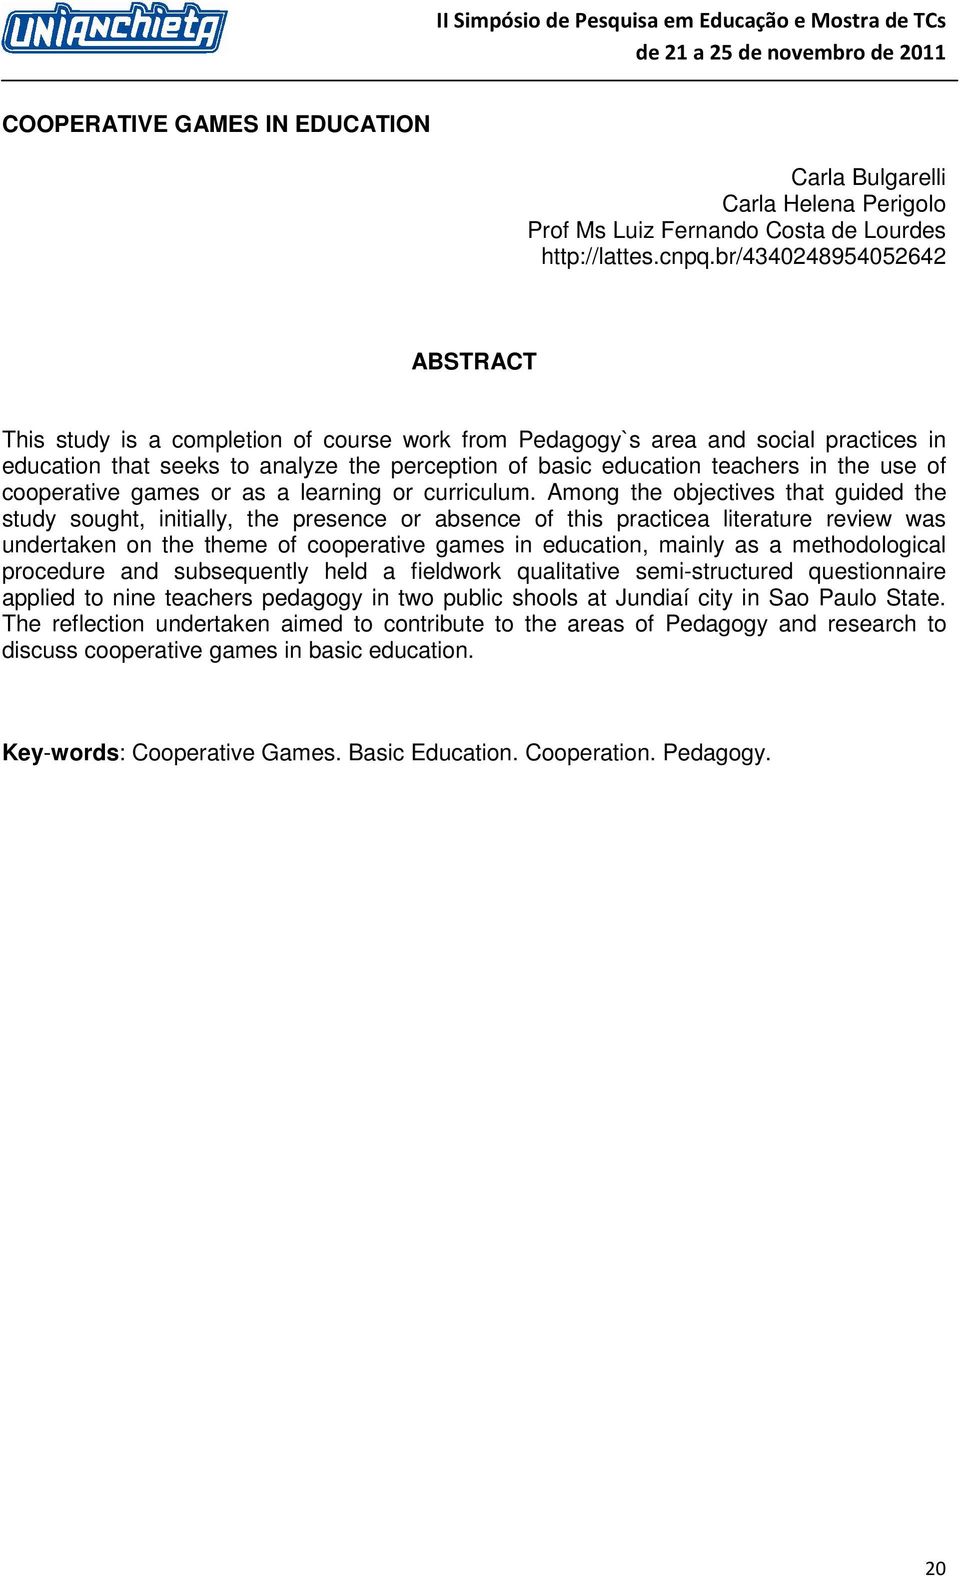 Among the objectives that guided the study sought, initially, the presence or absence of this practicea literature review was undertaken on the theme of cooperative games in education, mainly as a